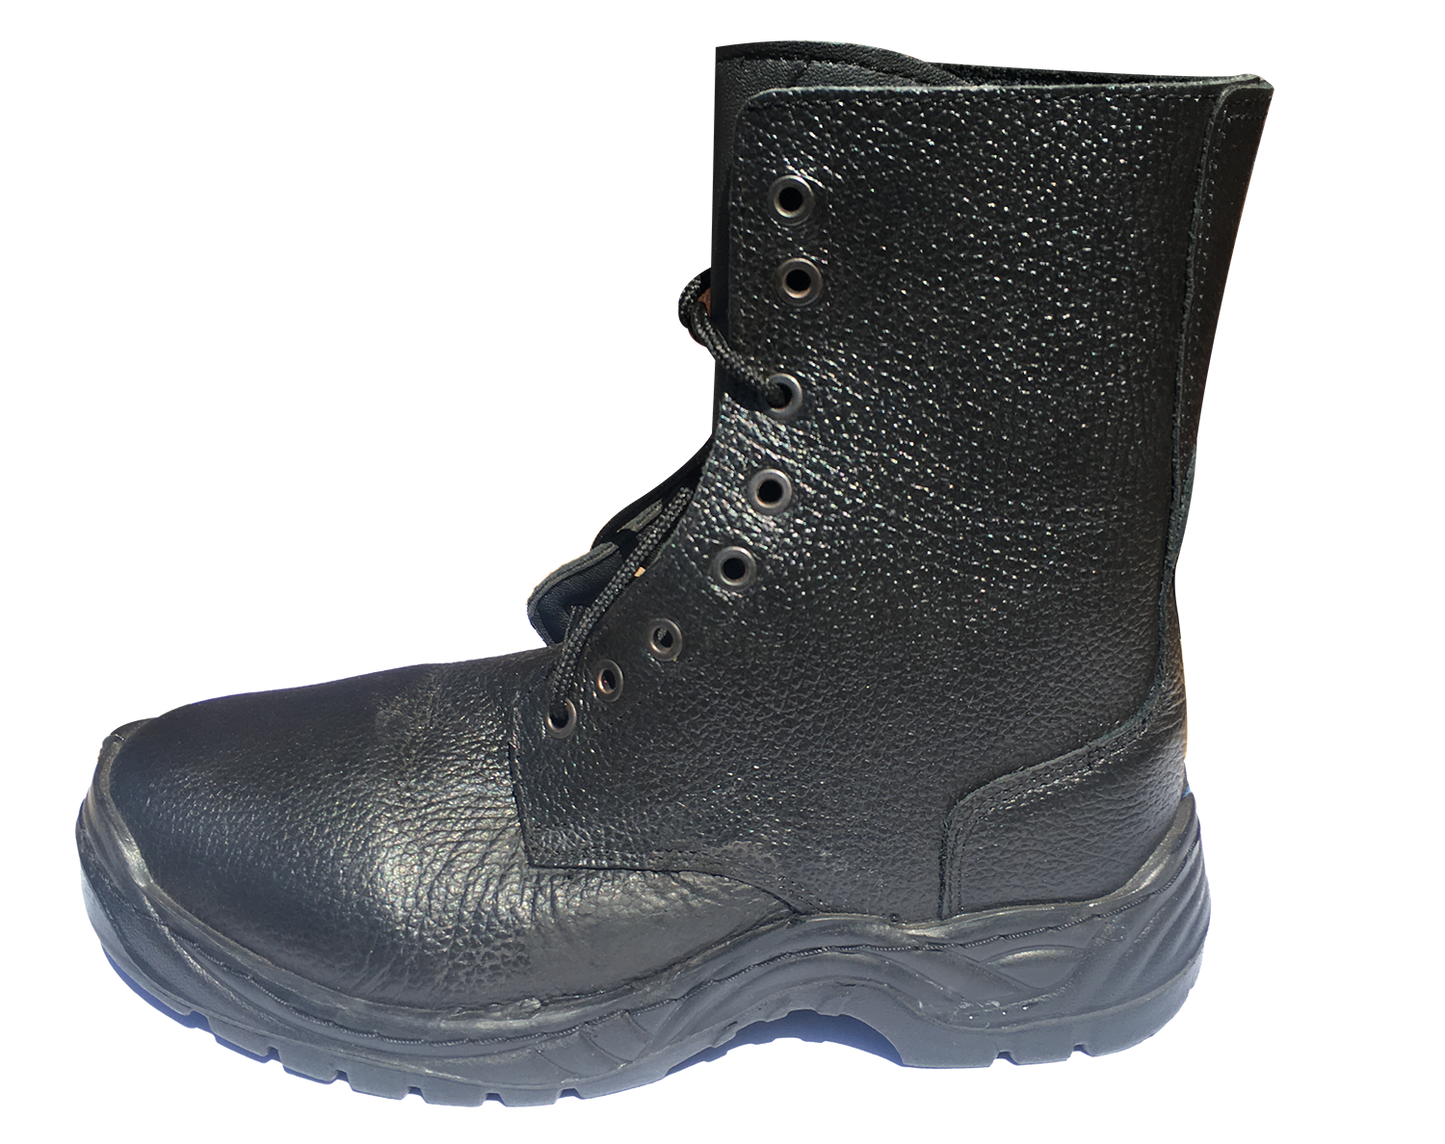 Cloud by Day Leather Security Boot